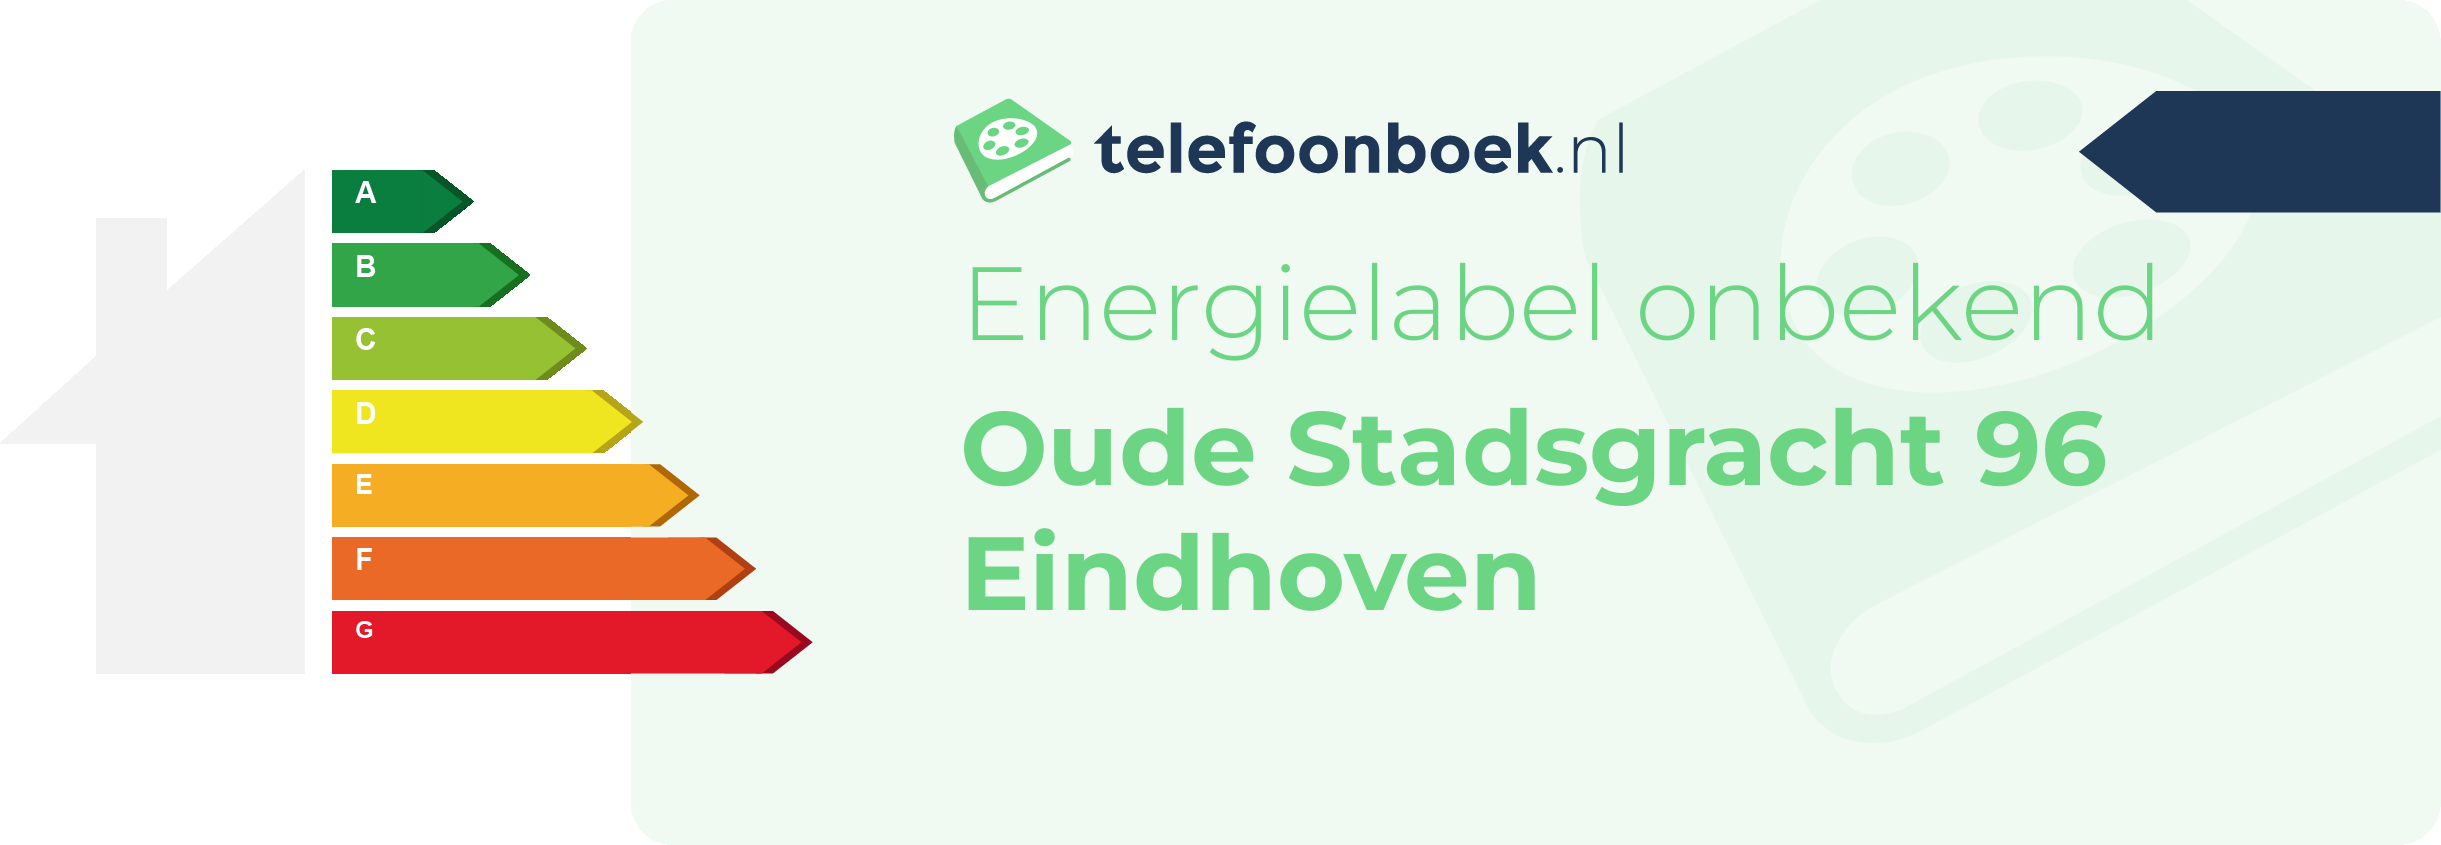 Energielabel Oude Stadsgracht 96 Eindhoven